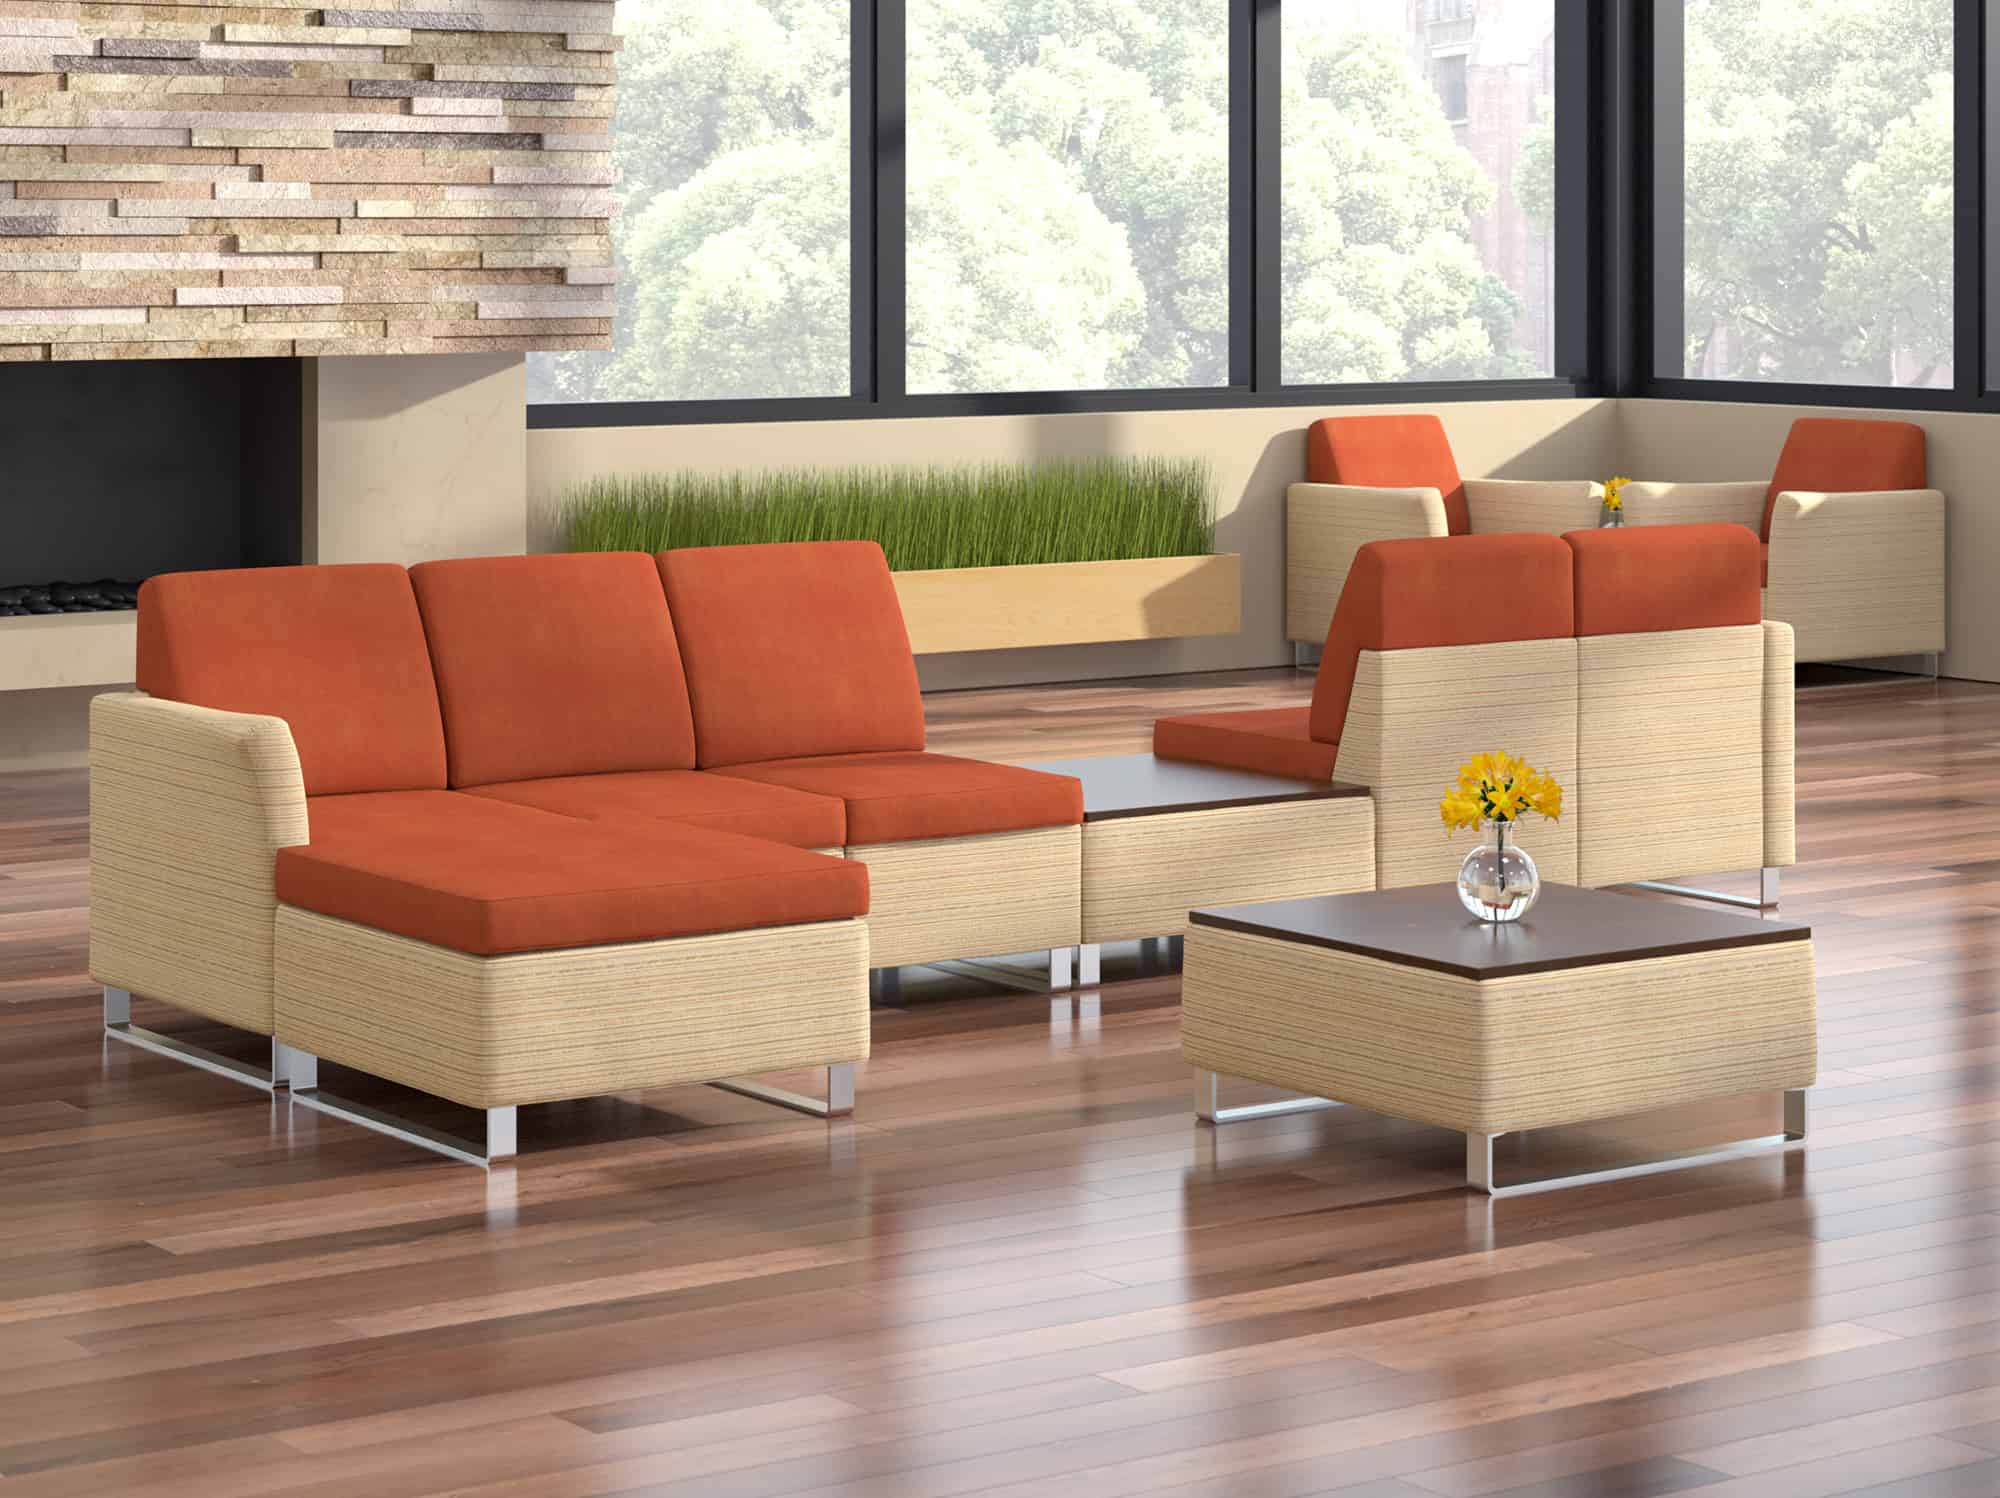 Rally Modular Seating Collection in a lounge area at college